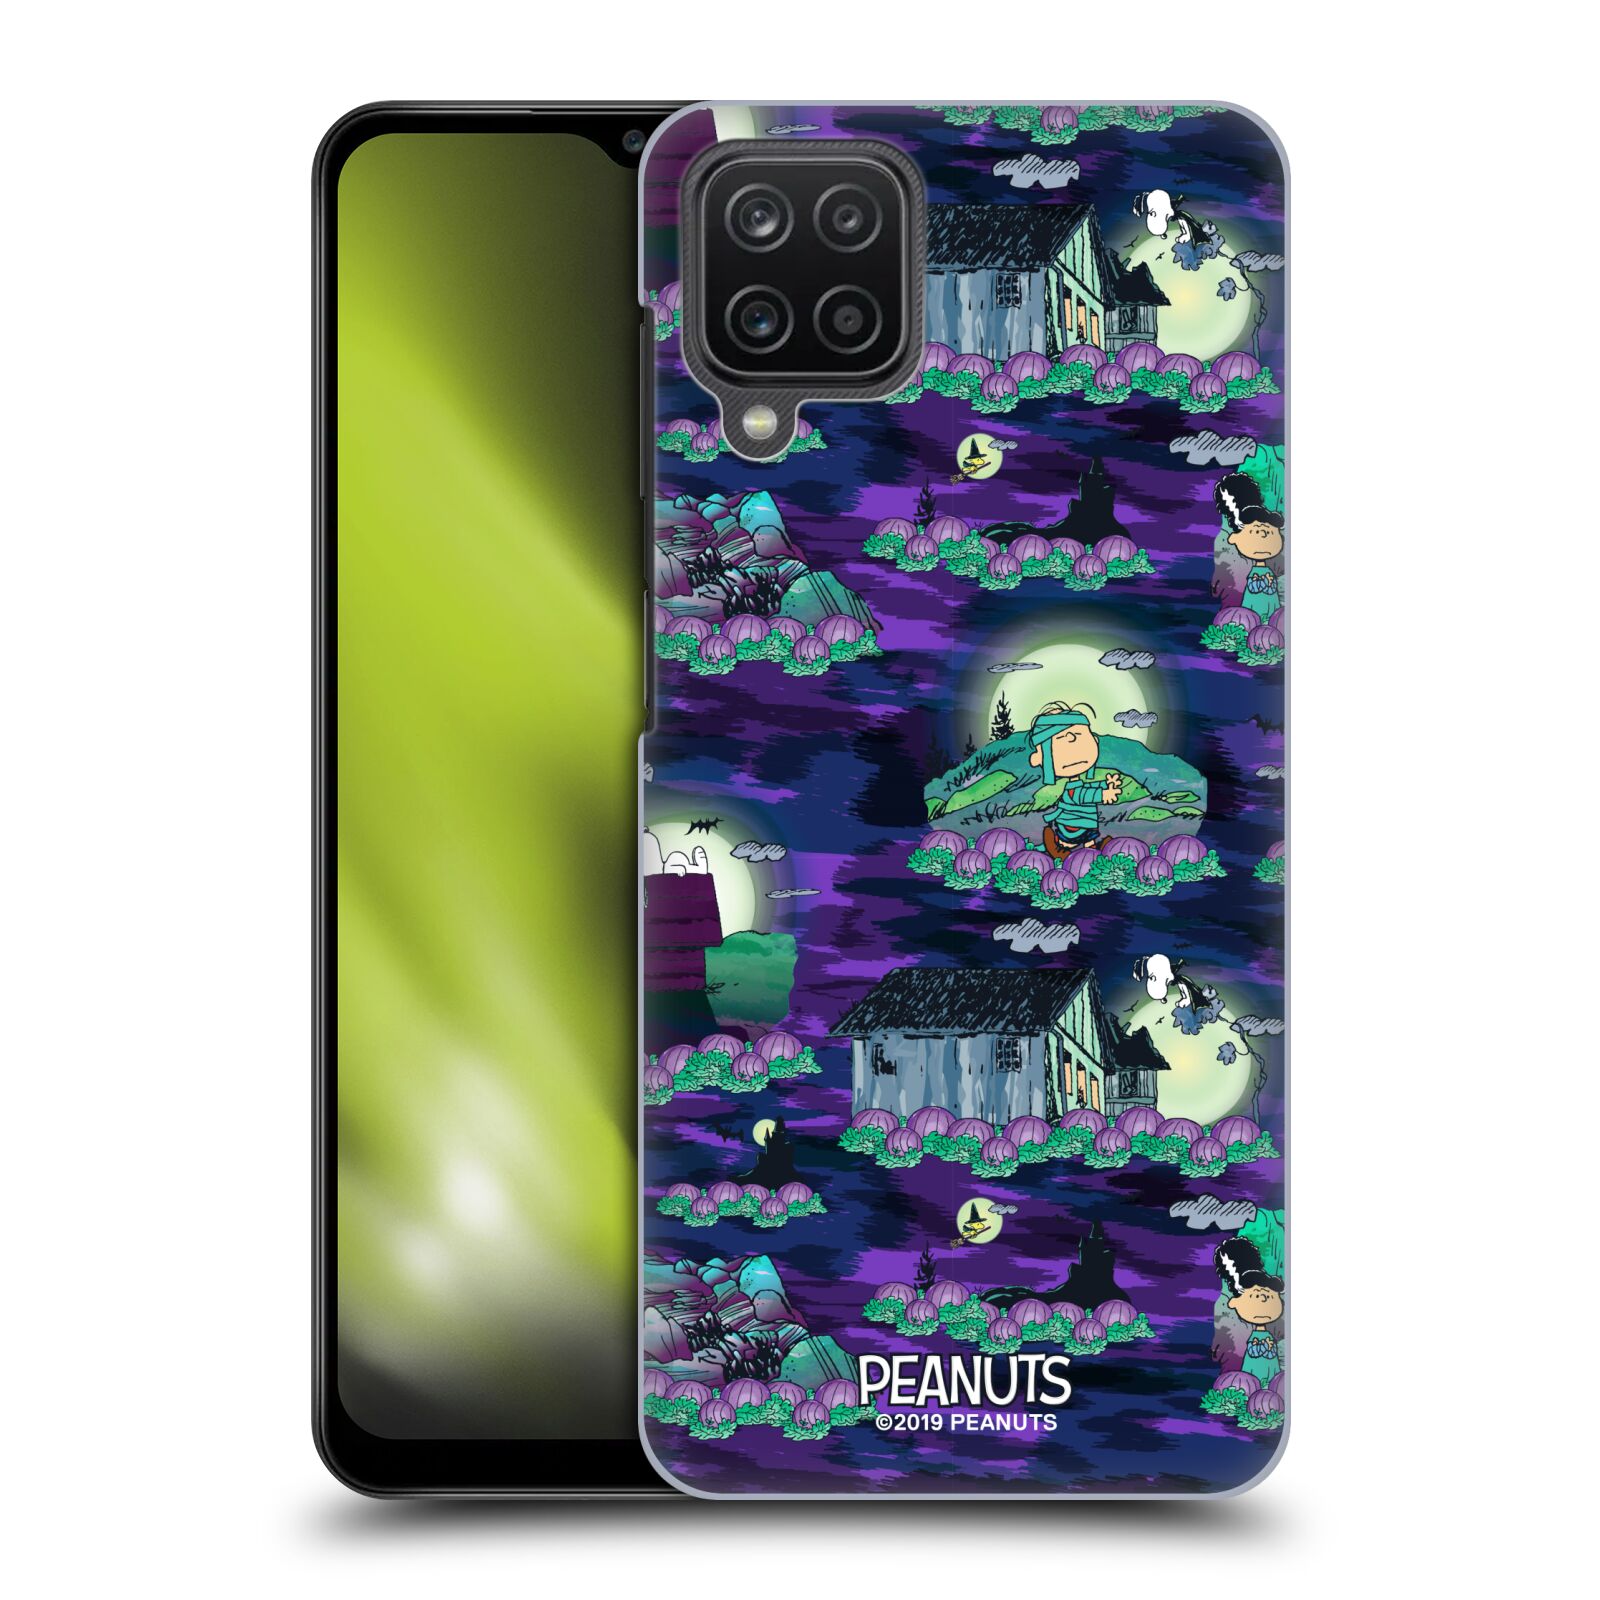 Head Case Designs Officially Licensed Peanuts Spooktacular Snoopy Patterns Hard Back Case Compatible with Samsung Galaxy A12 (2020) - image 1 of 7